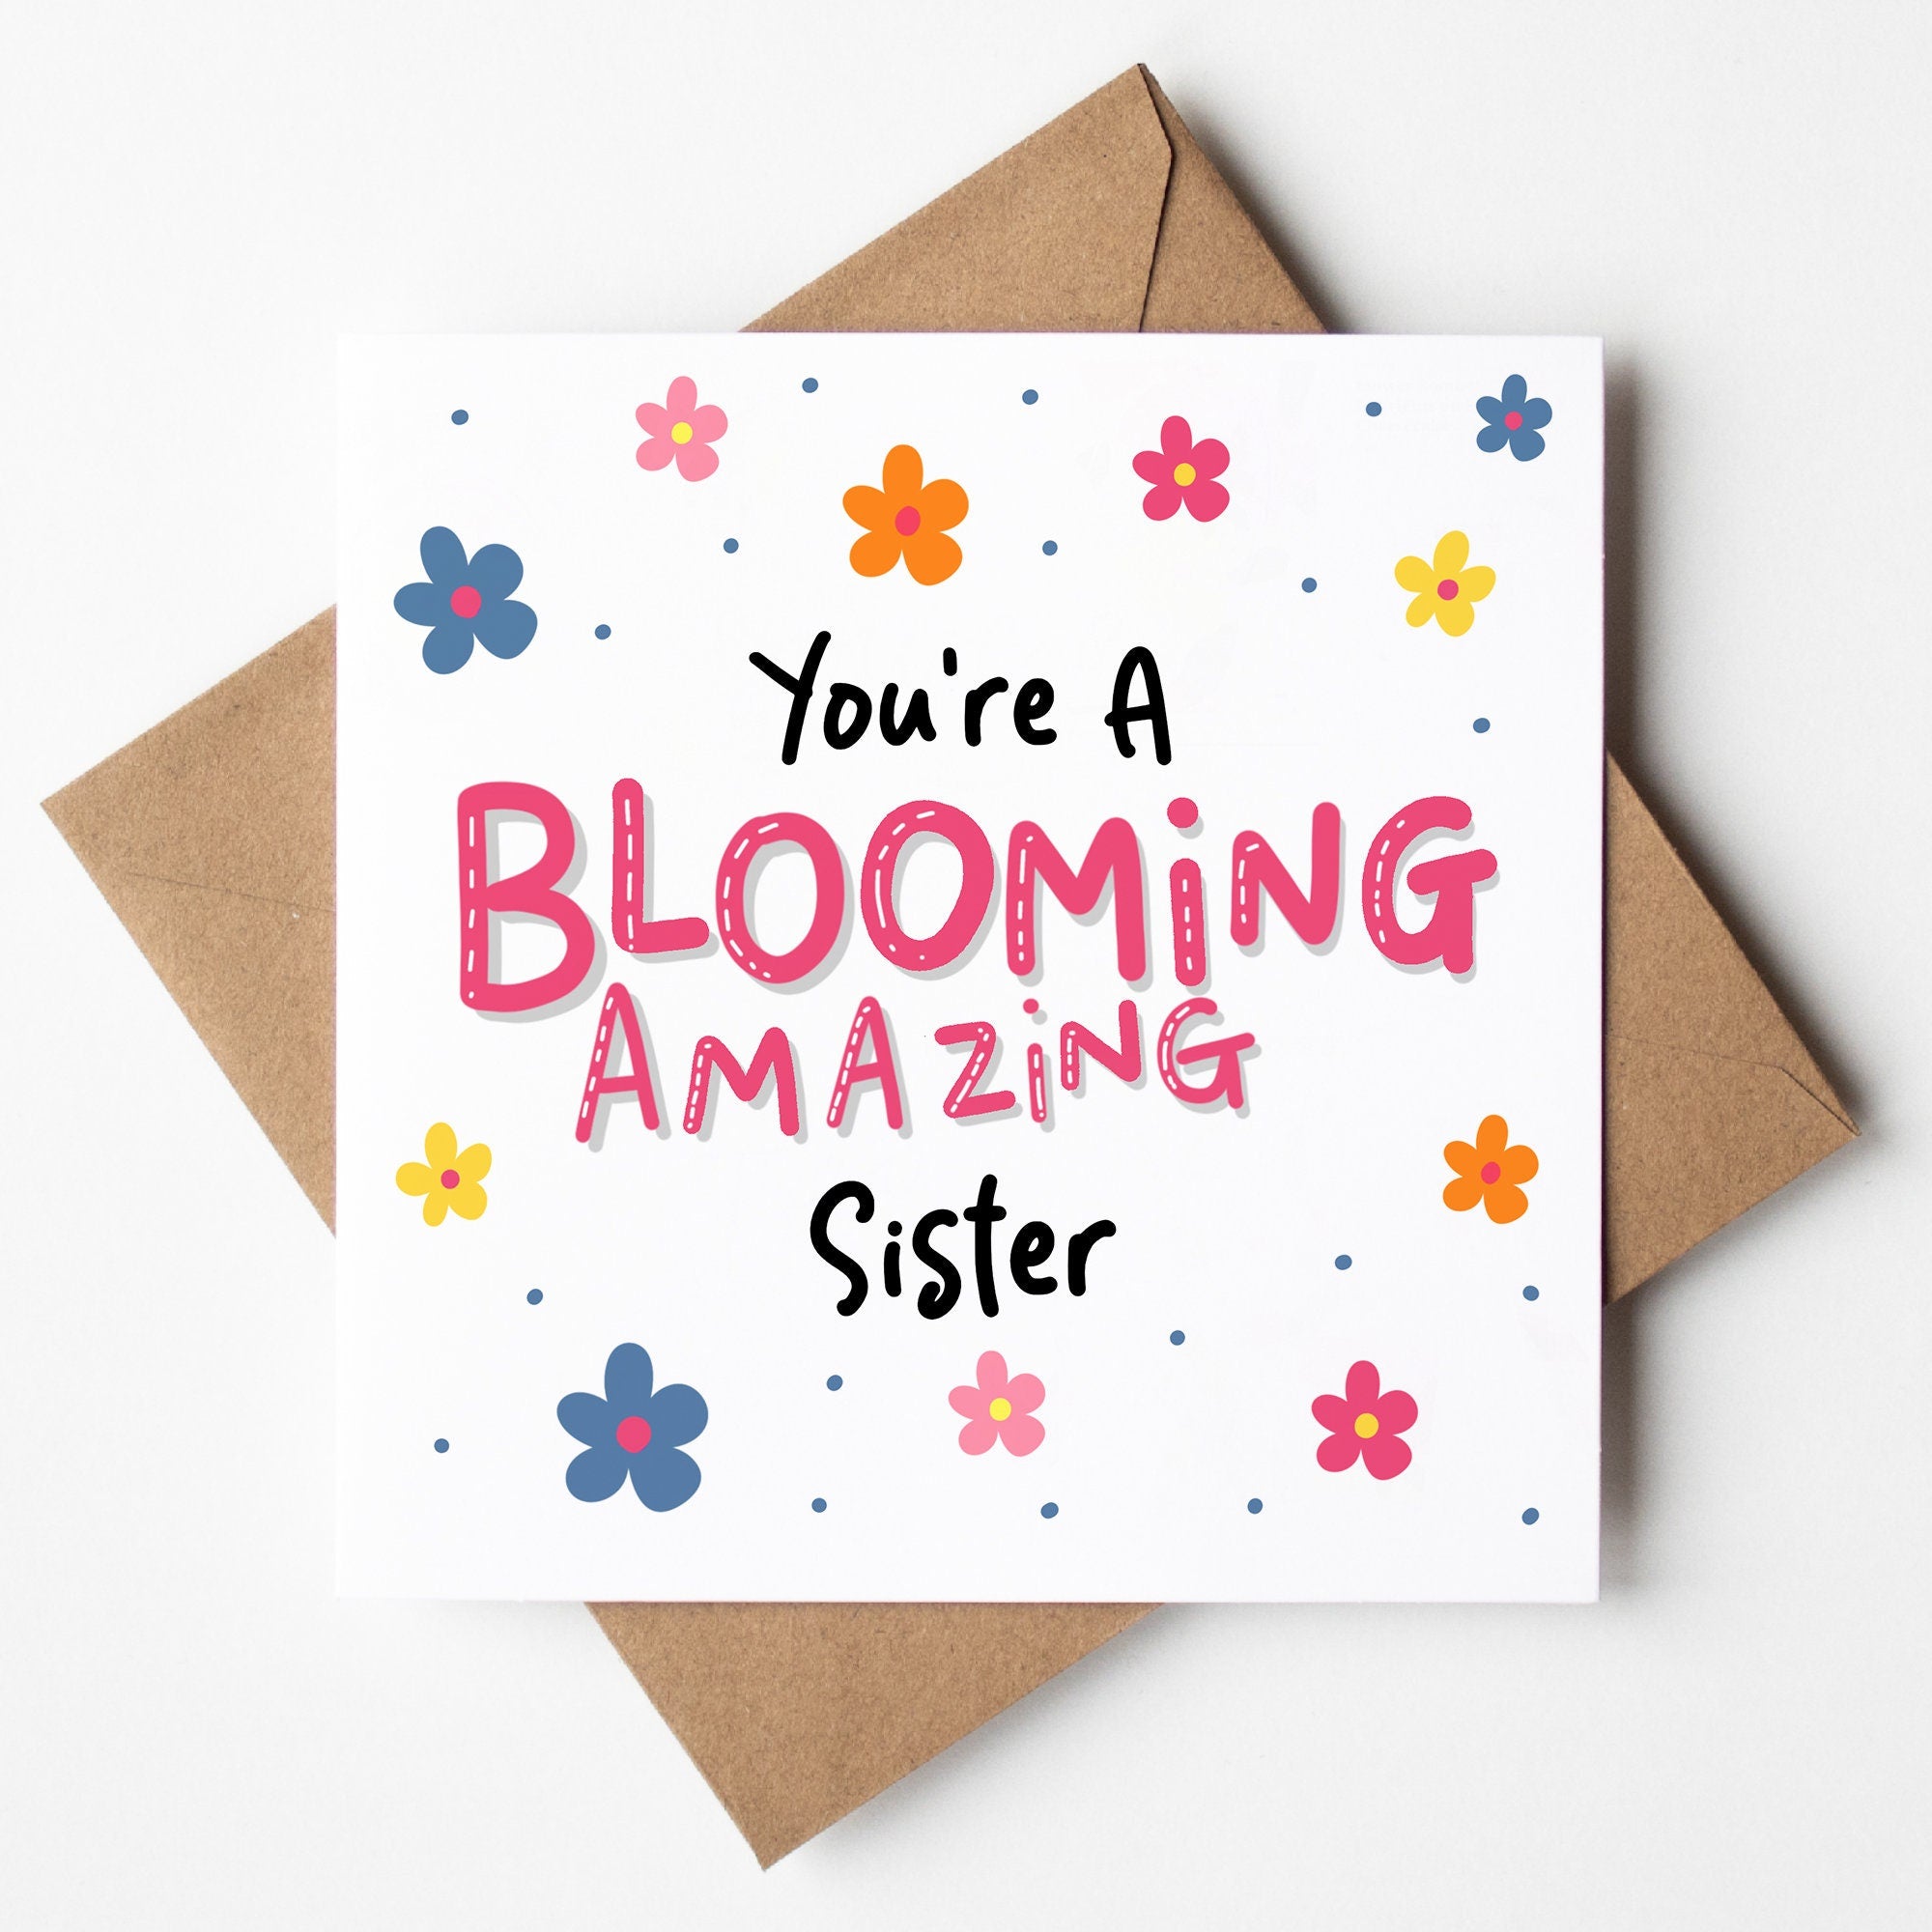 Sister Card - You're A Blooming Amazing Sister